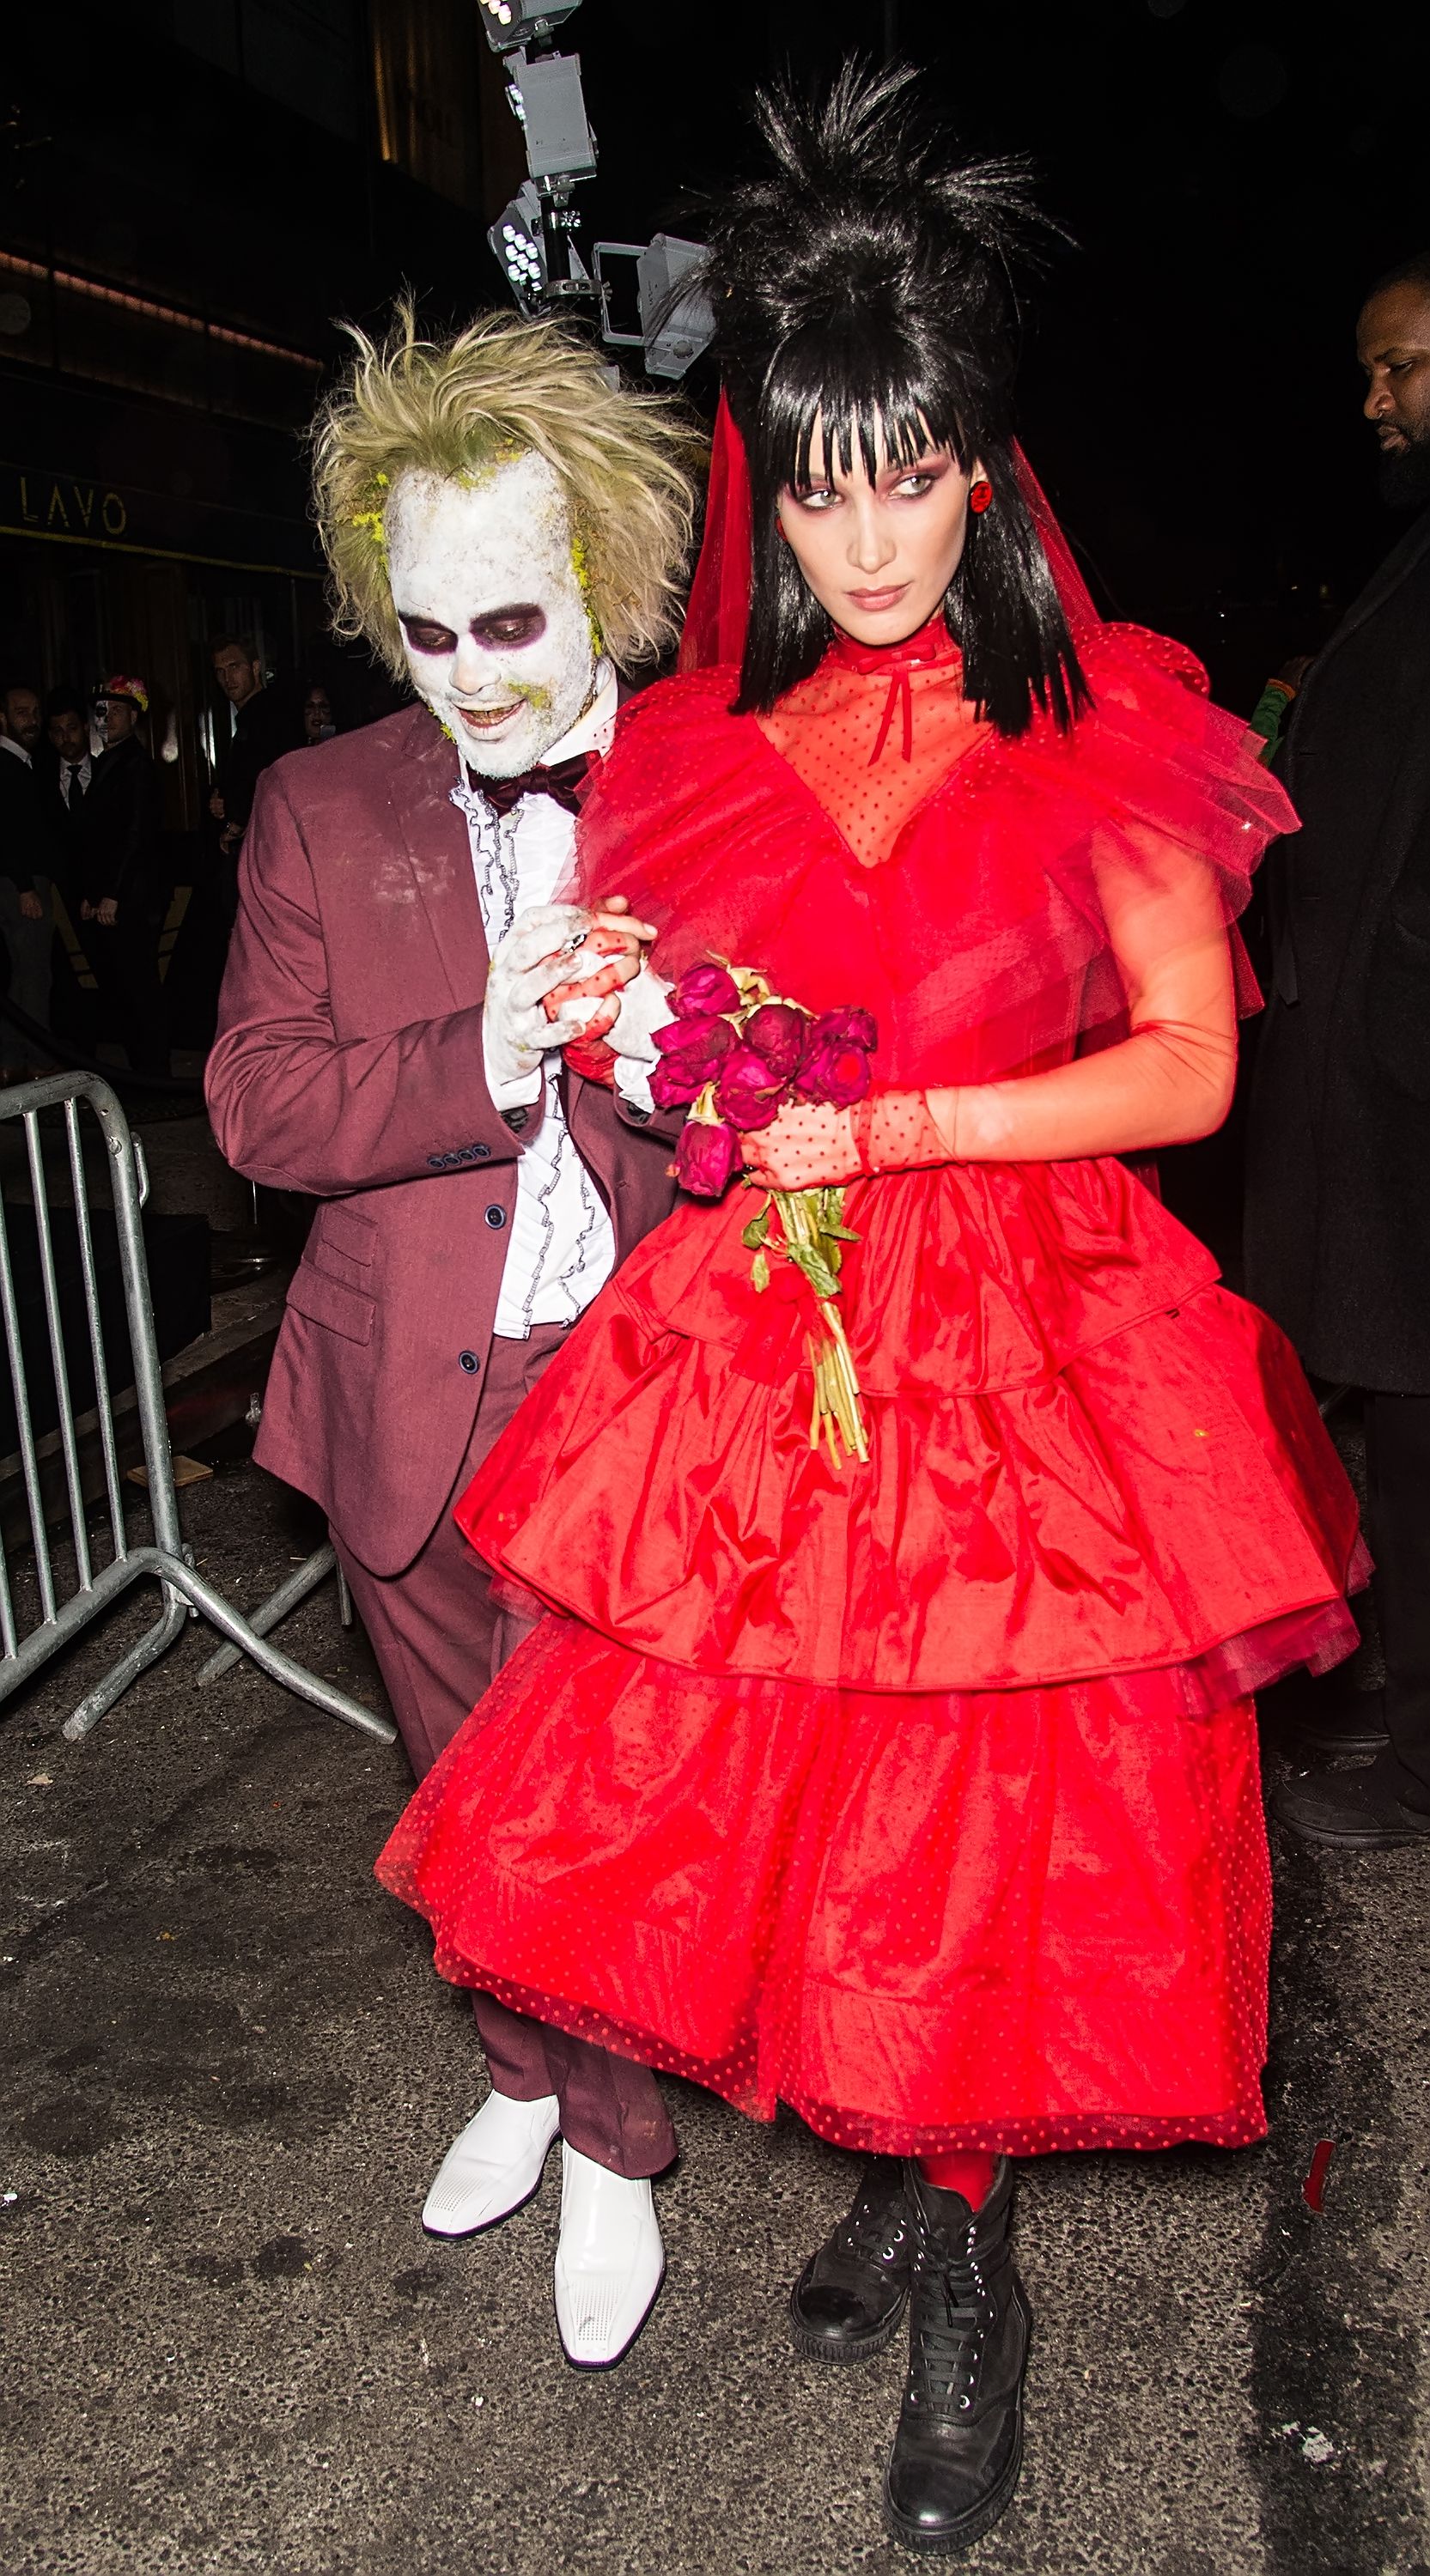 Stylish and Creative Couple Costume Ideas for Carnaval